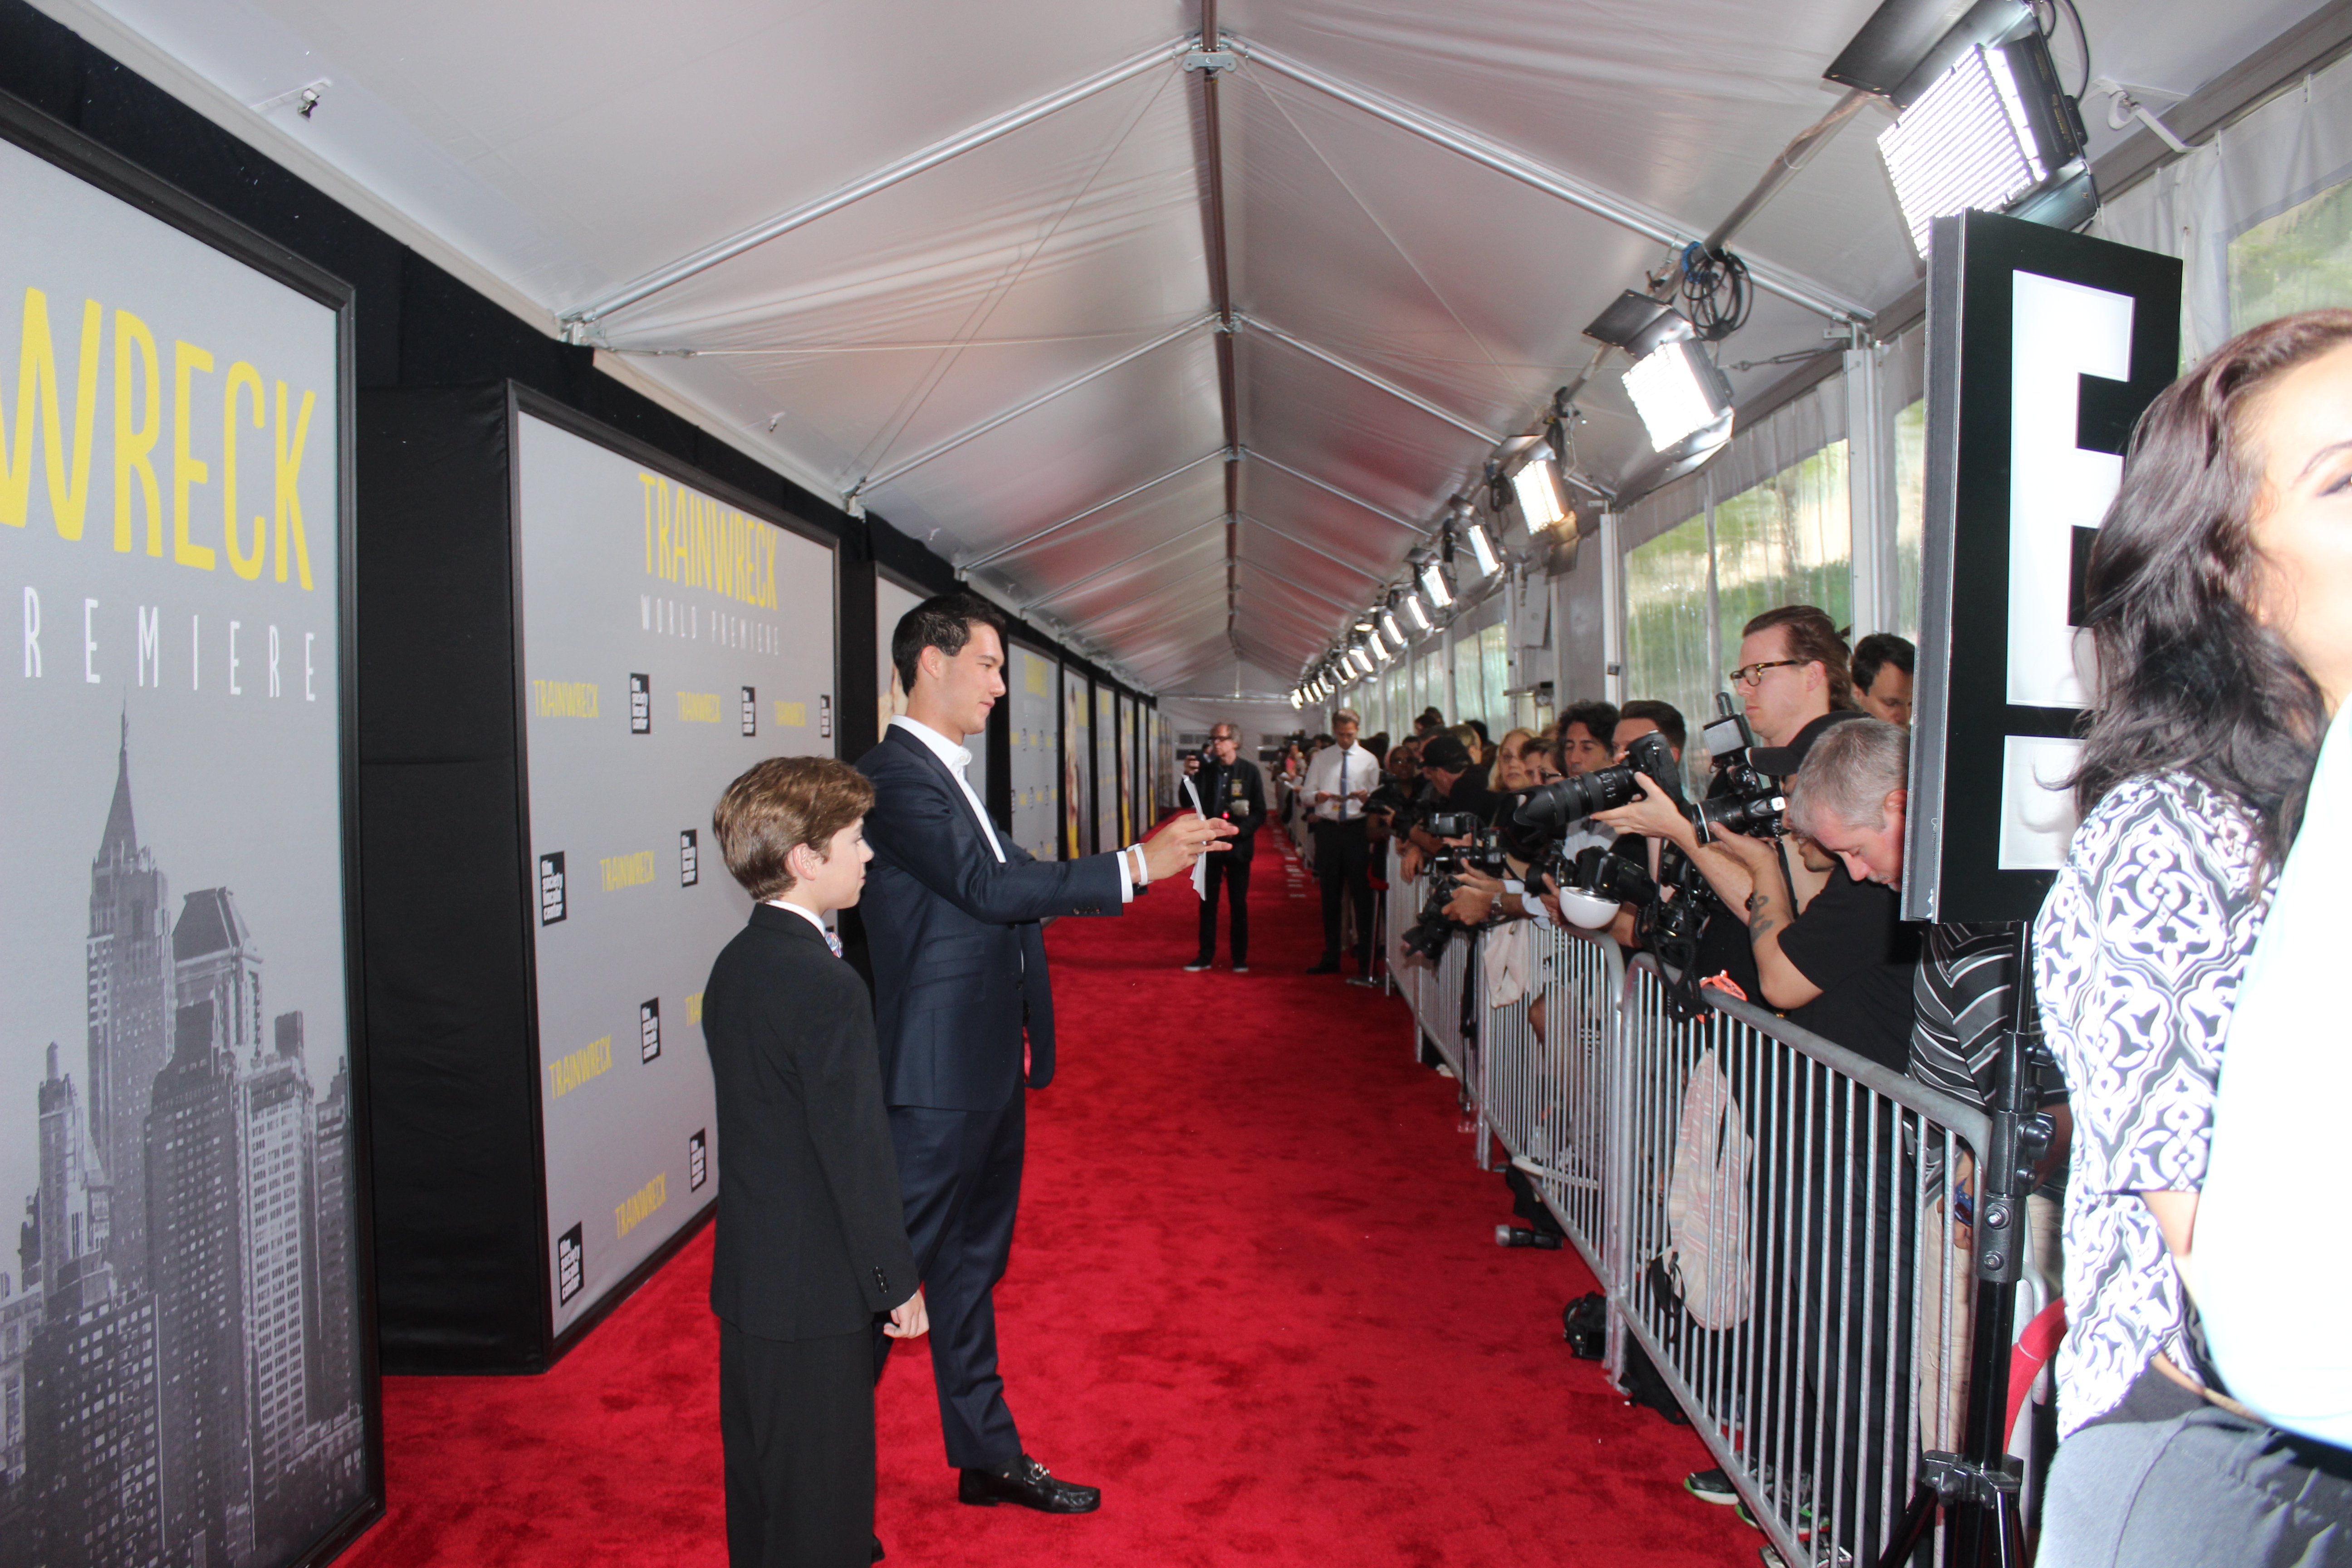 Walking the Red Carpet at the World Premier of TRAINWRECK in NYC on July 14, 2015.